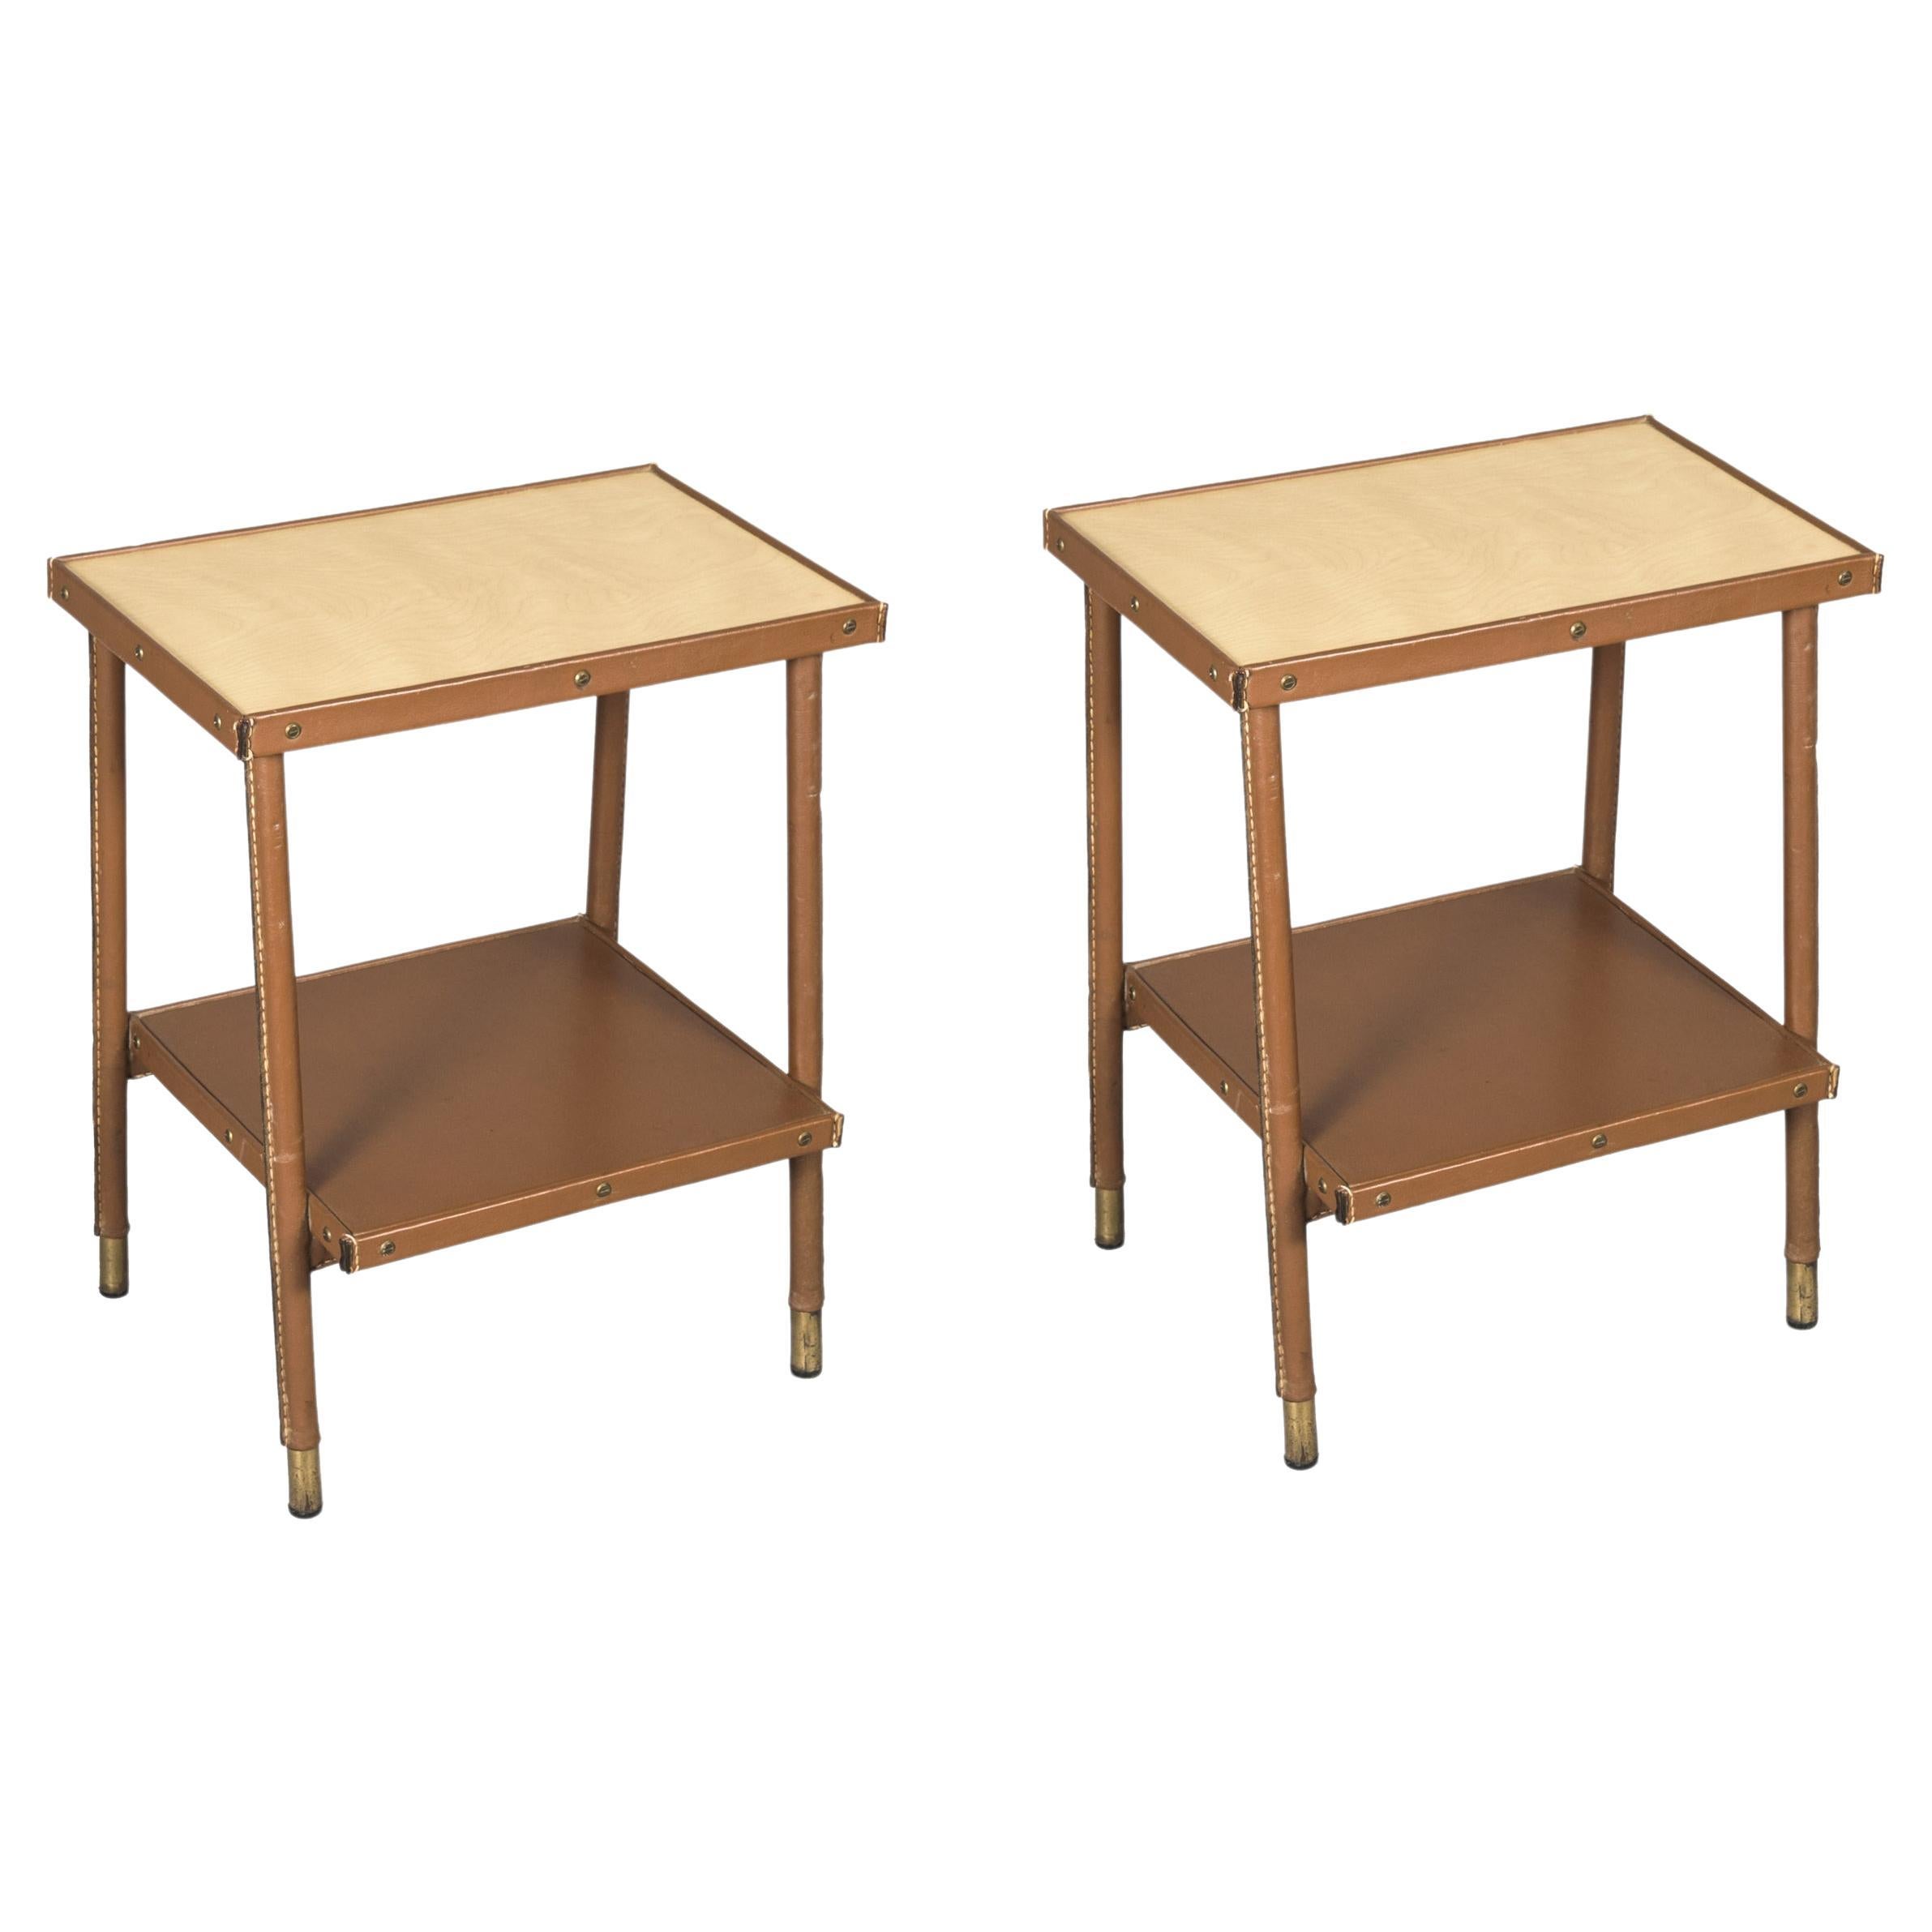 1950's Stitched leather Side tables by Jacques Adnet